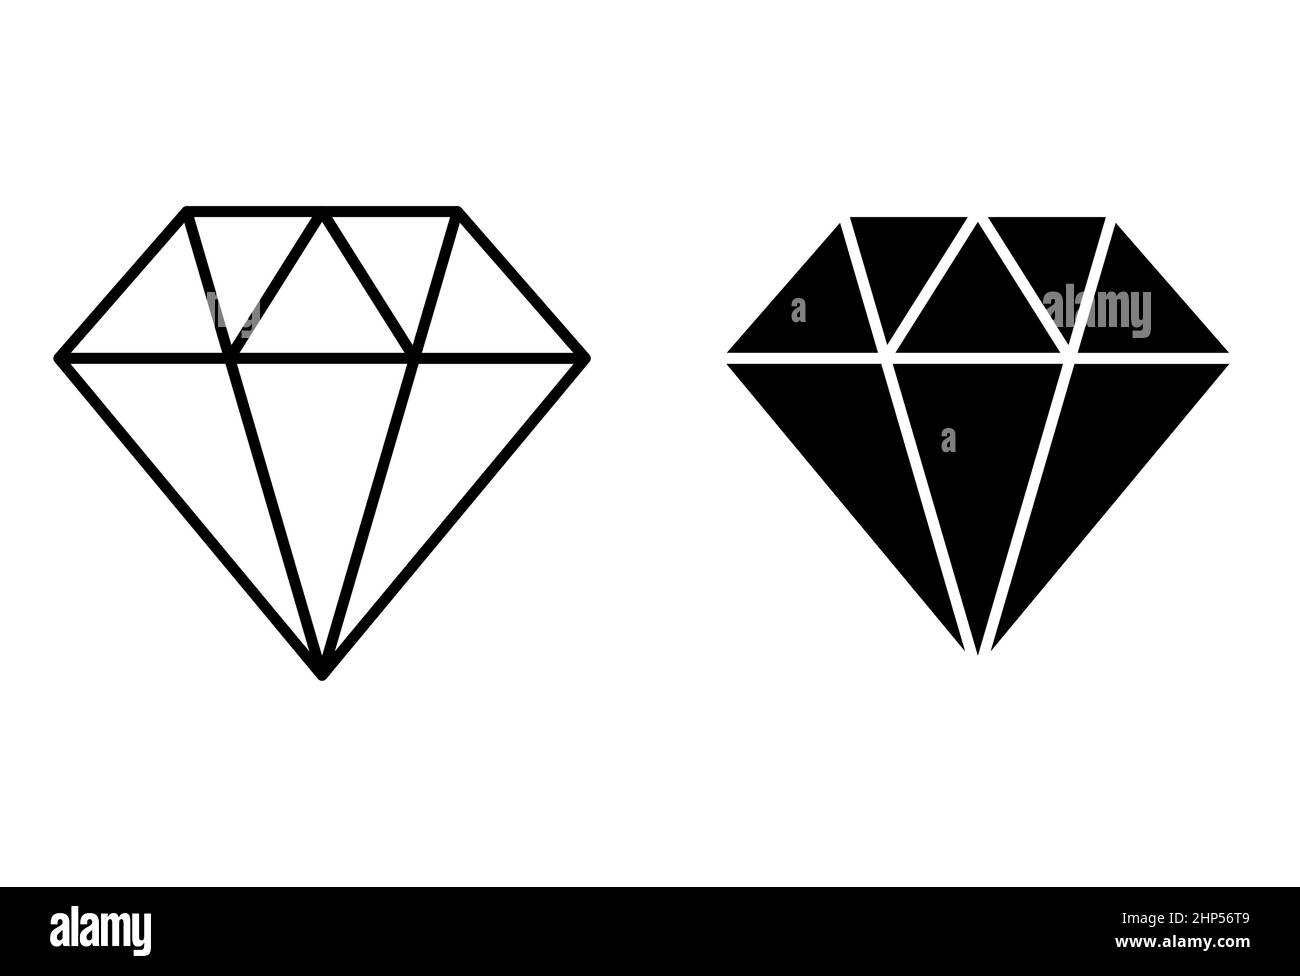 Diamond stone simple cartoon icon. Crystal gemstone symbol set. Silhouette and outline design. Vector illustration isolated on white. Stock Vector